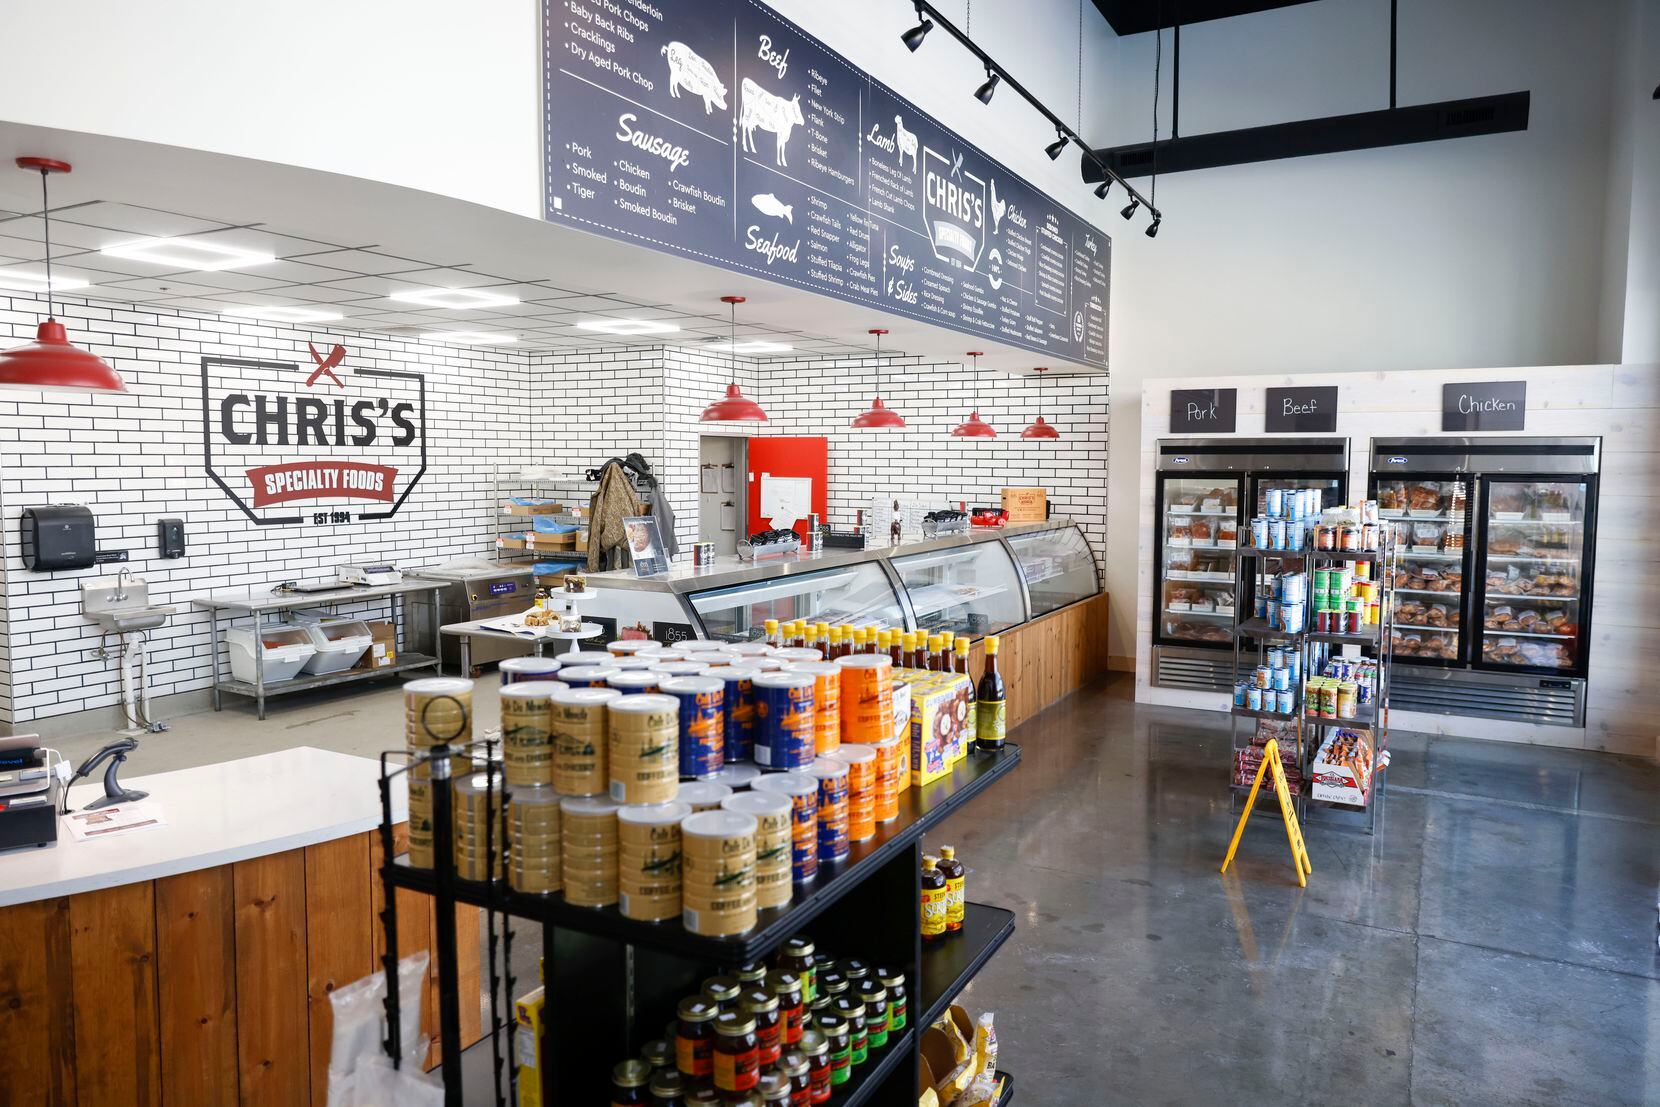 Chris's Specialty Foods in Frisco offers a variety of grab-and-go meals and condiments.